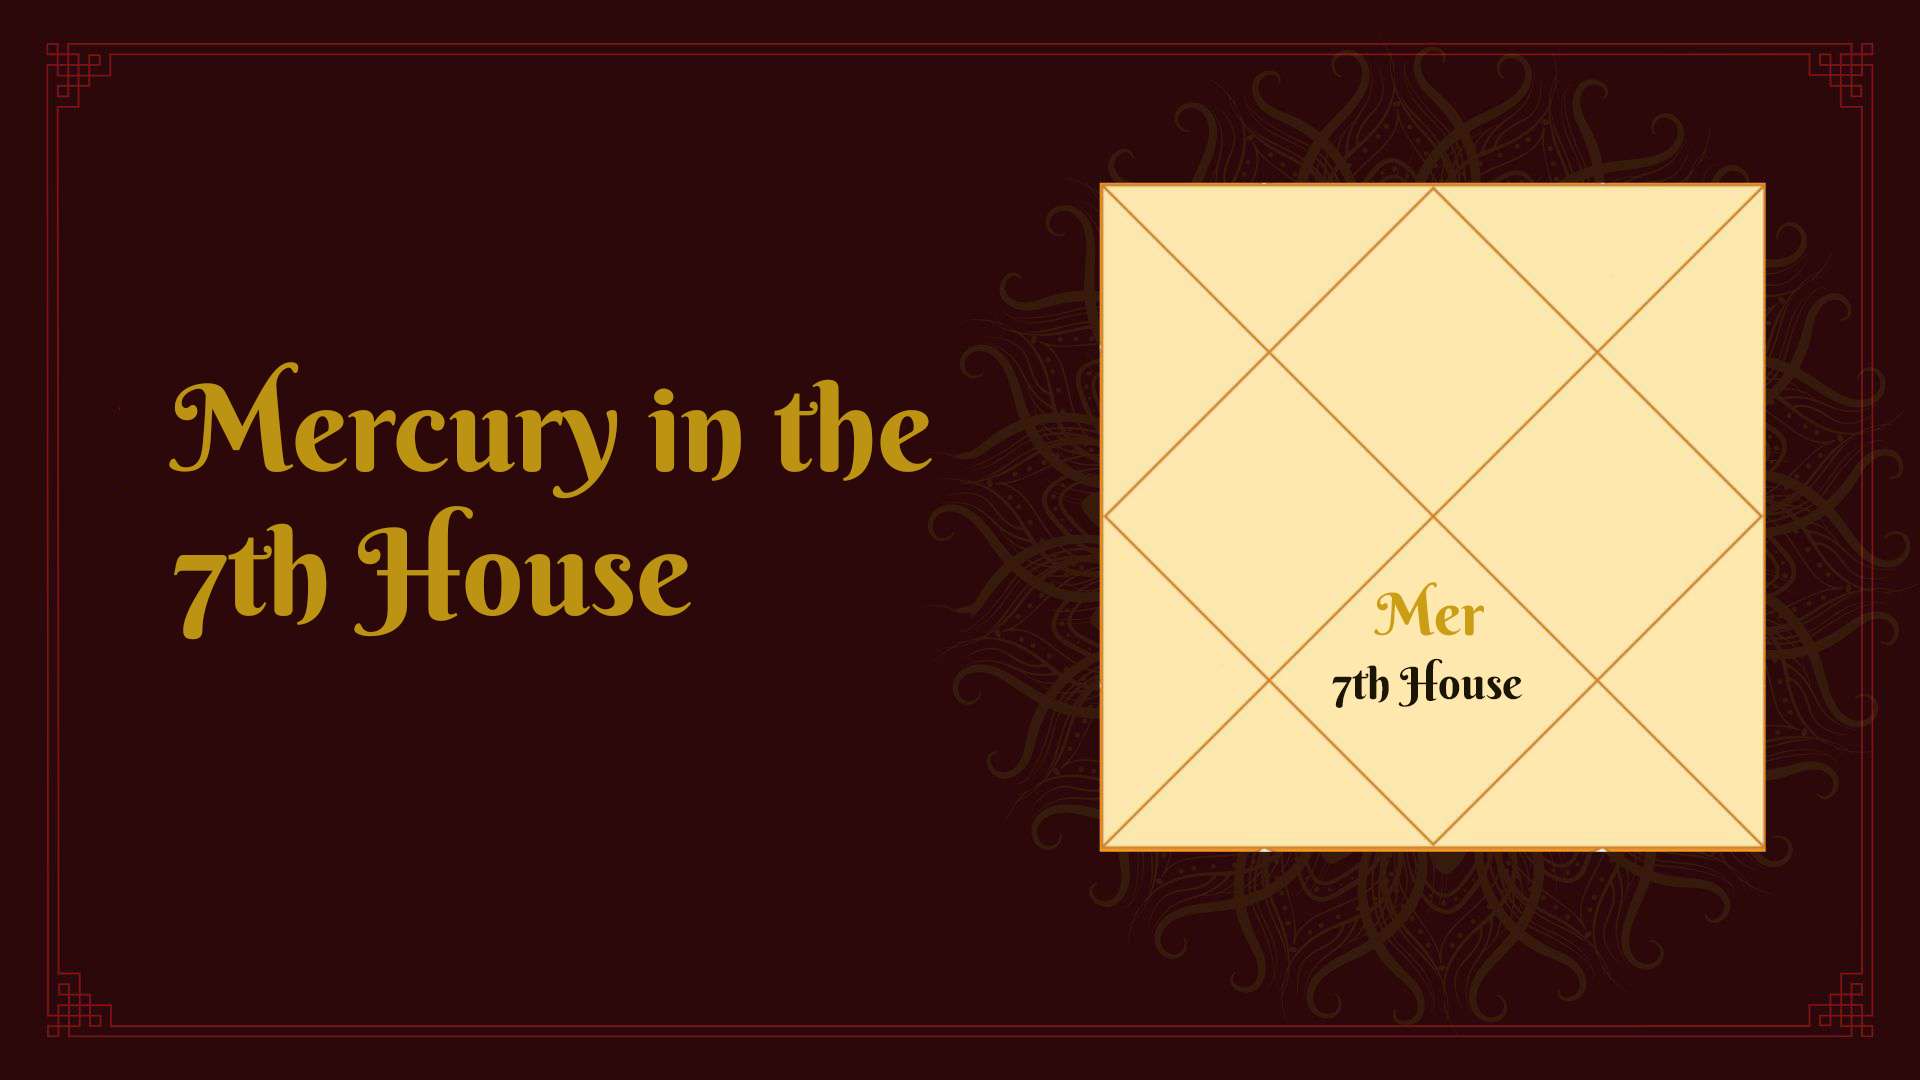 Effects of Mercury in the 7th house